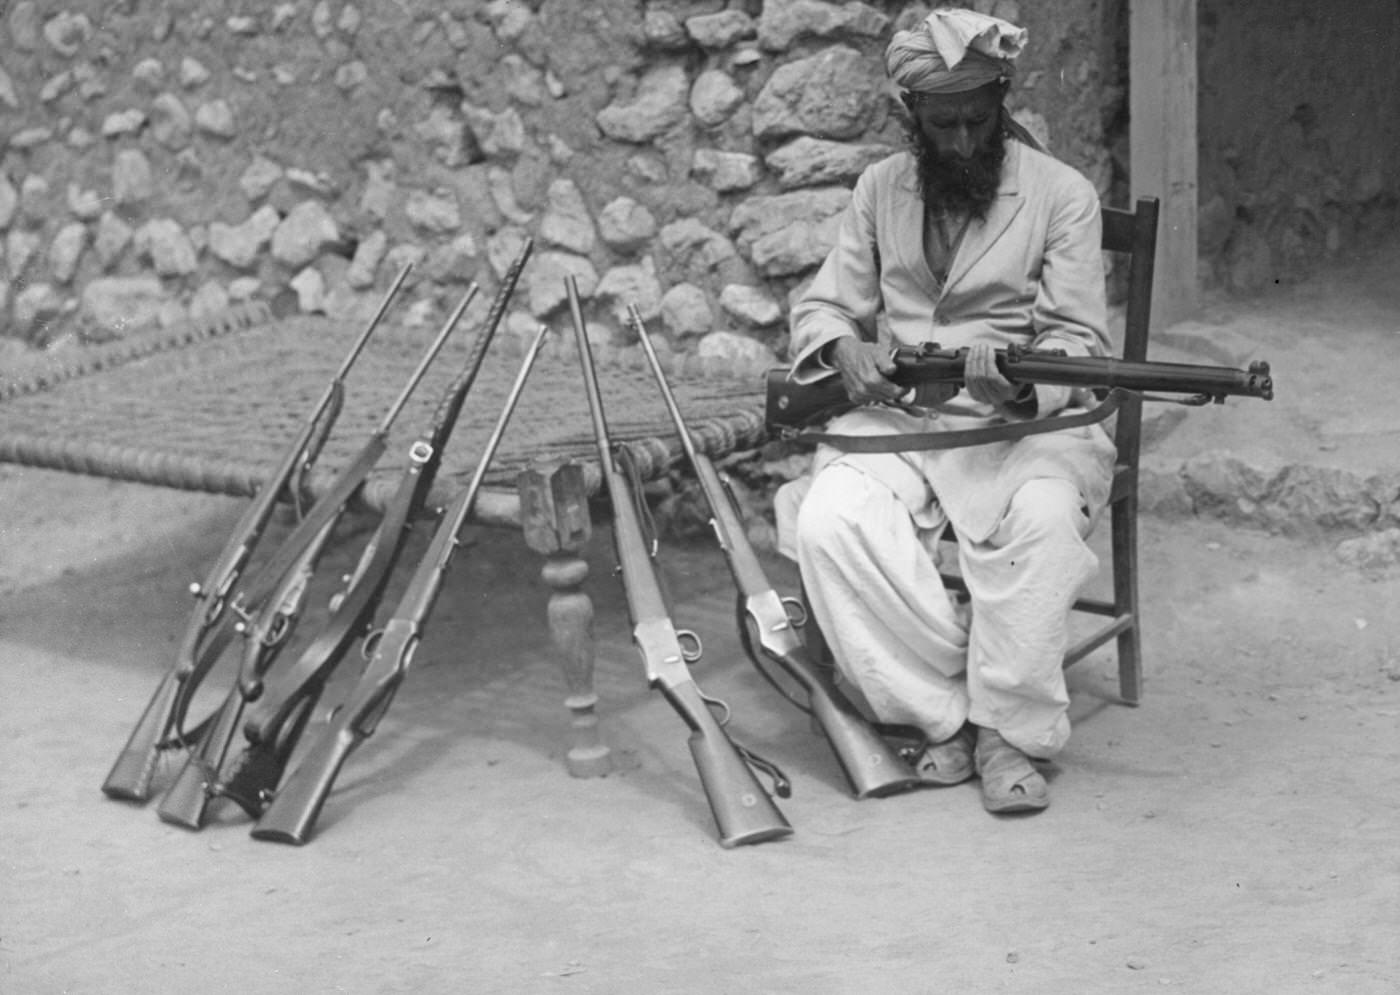 Rifle factory on the Kohat Pass between India and Afghanistan, 1950.